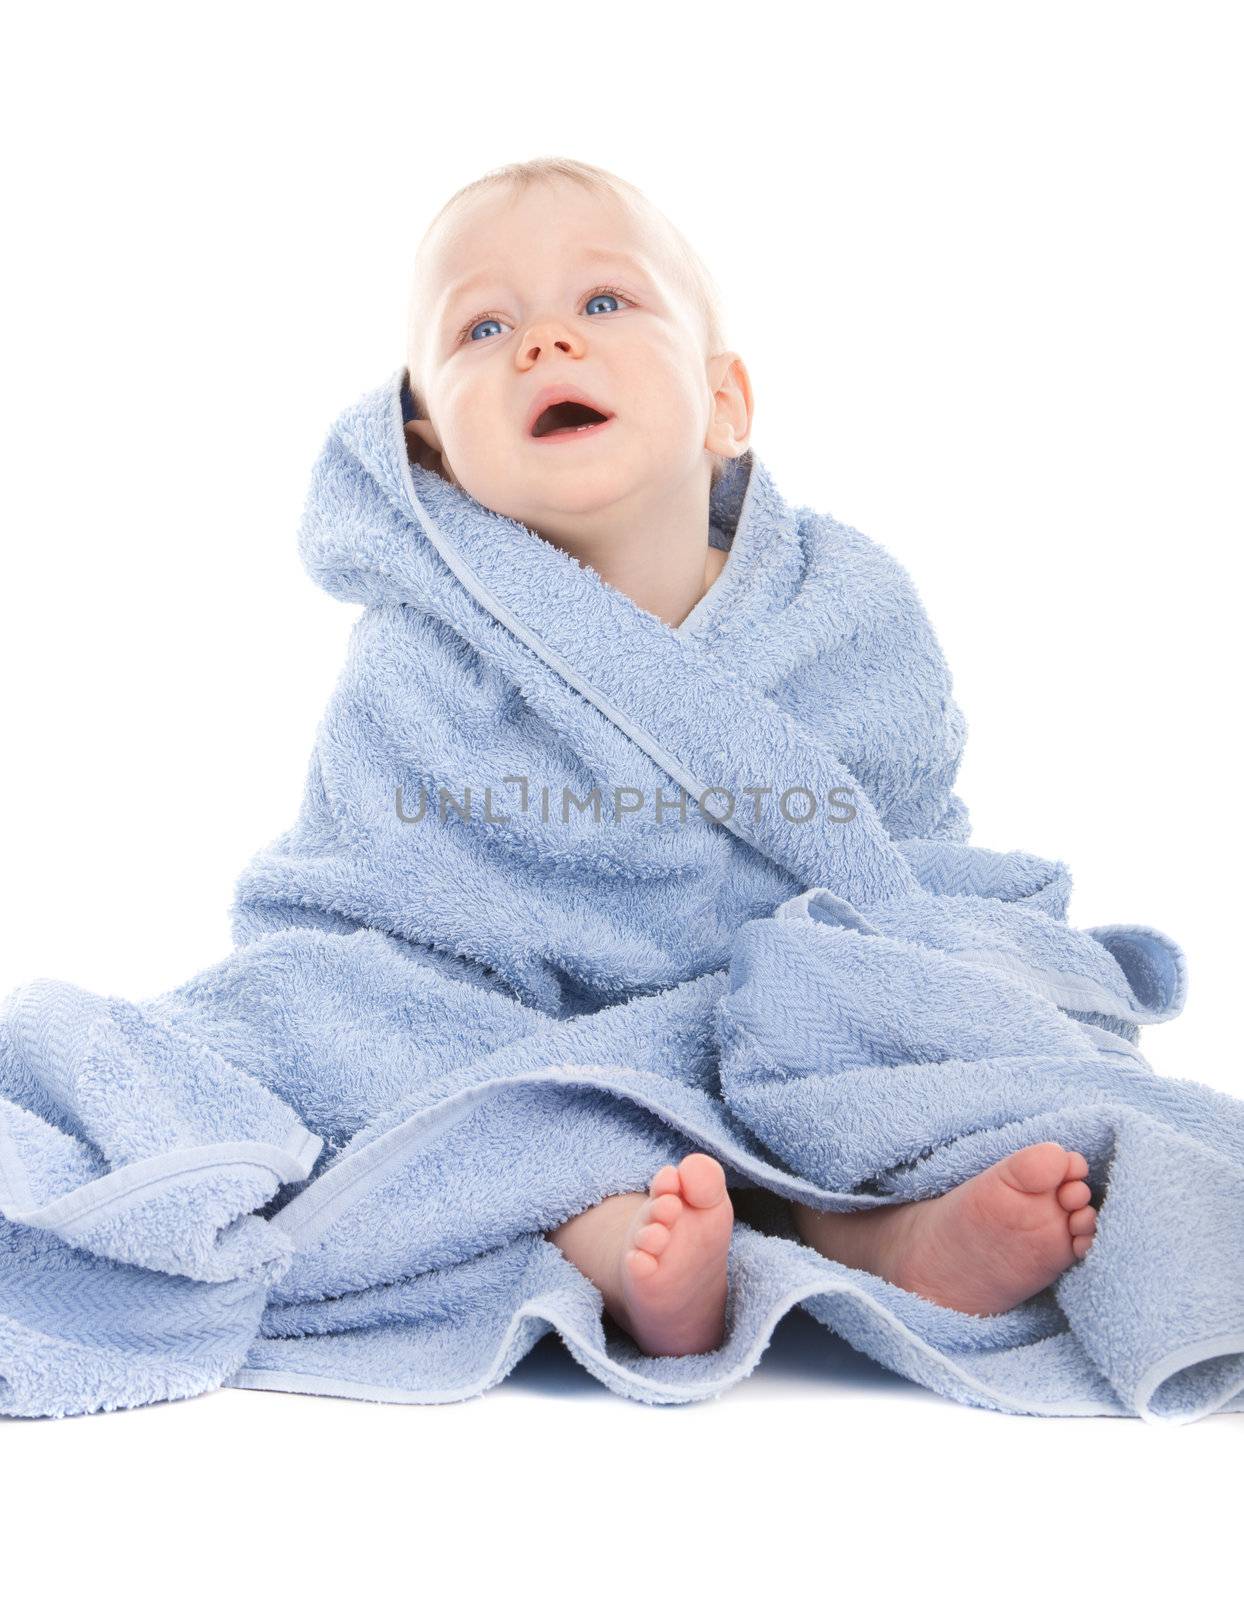 Crying baby sitting in a blue towel on white background